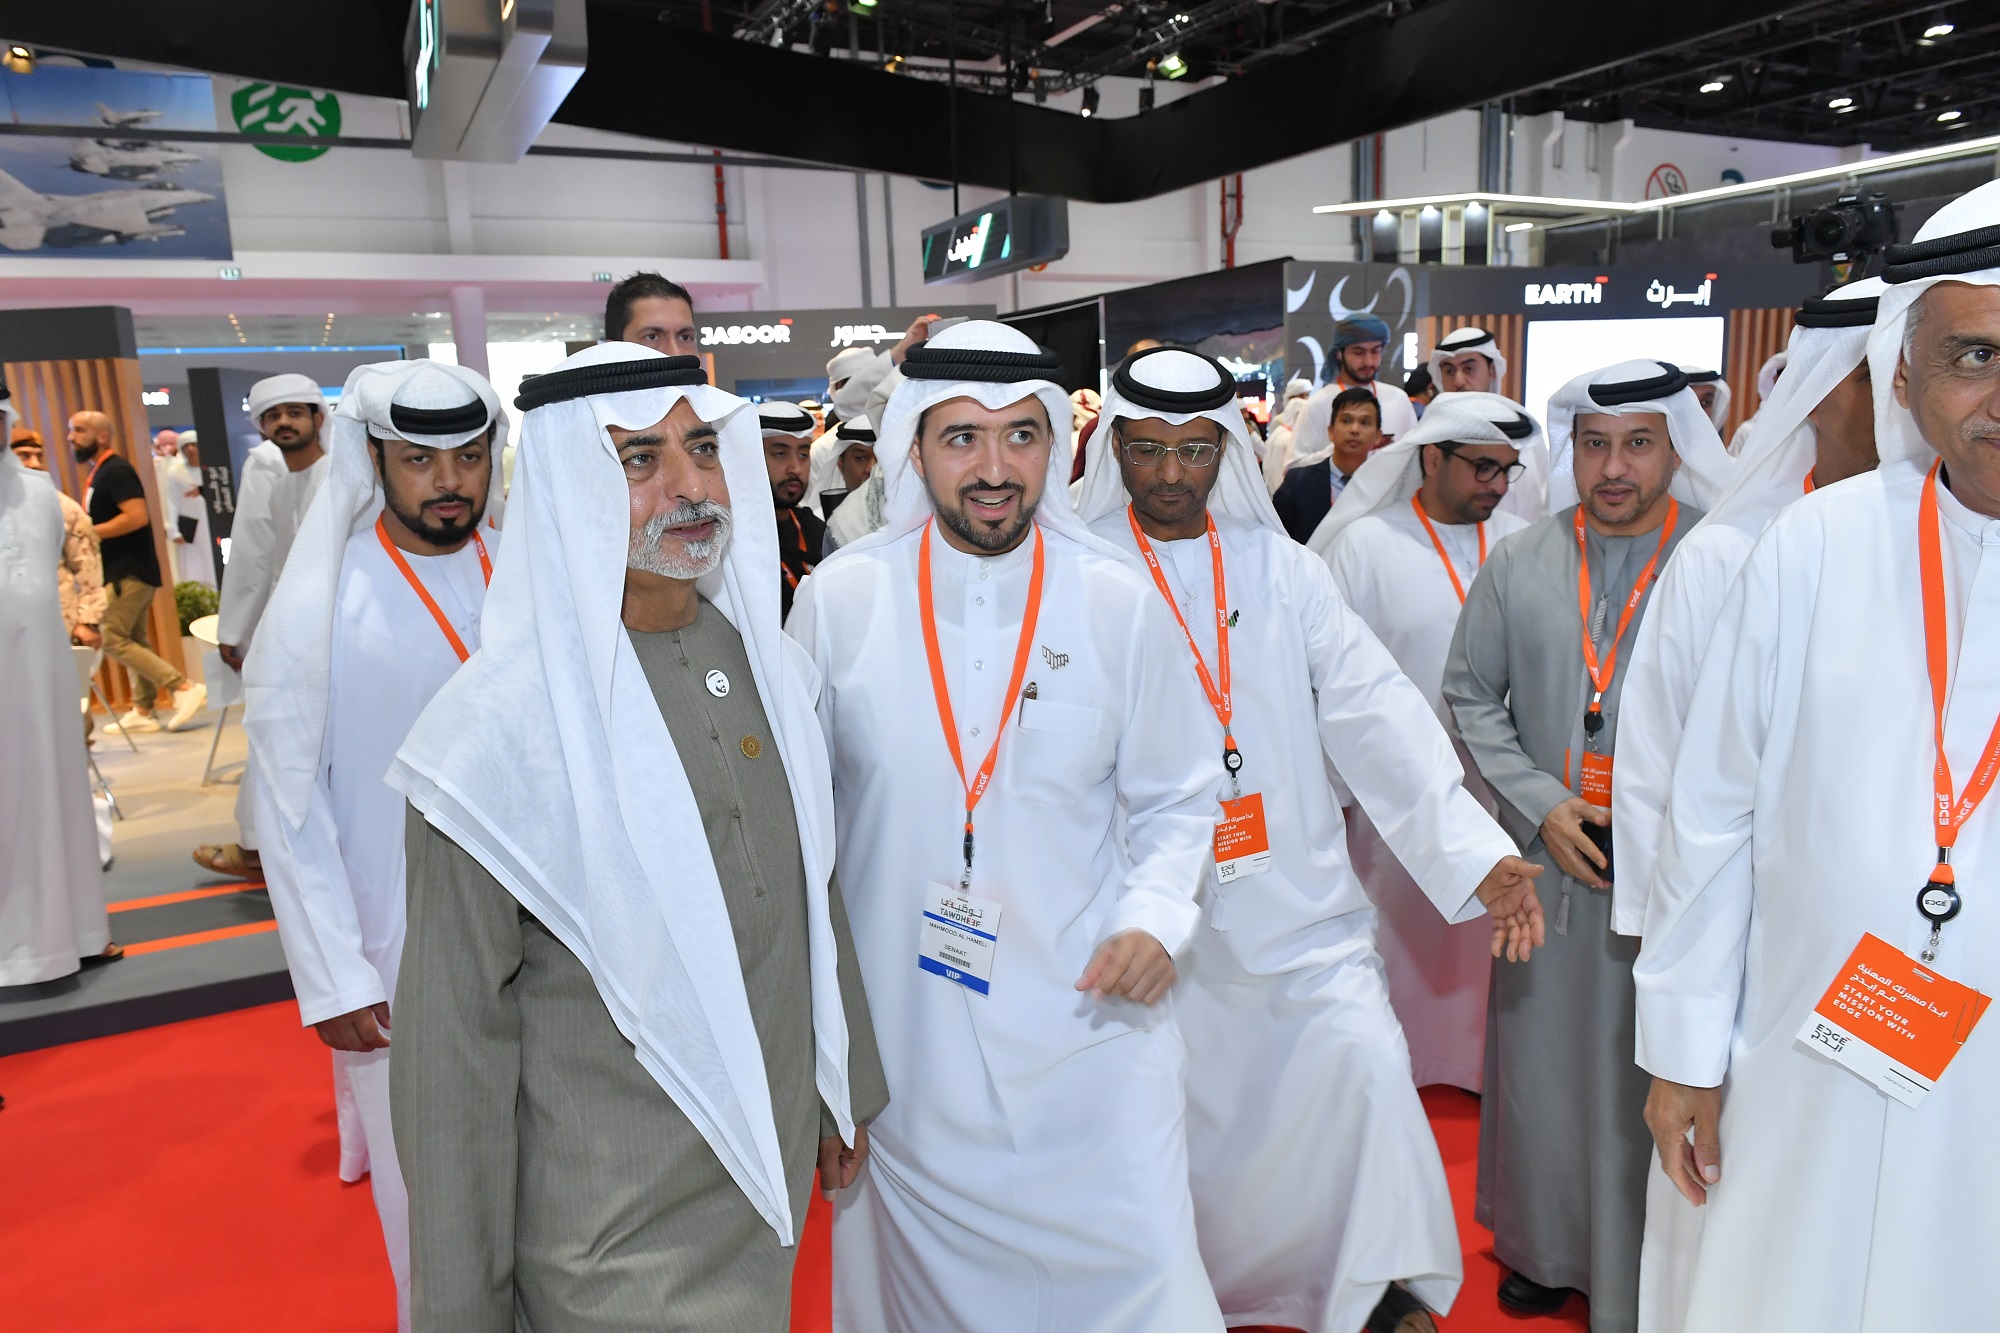 SENAAT Launches ‘Develop To Empower’ Training Programme At Tawdheef 2020